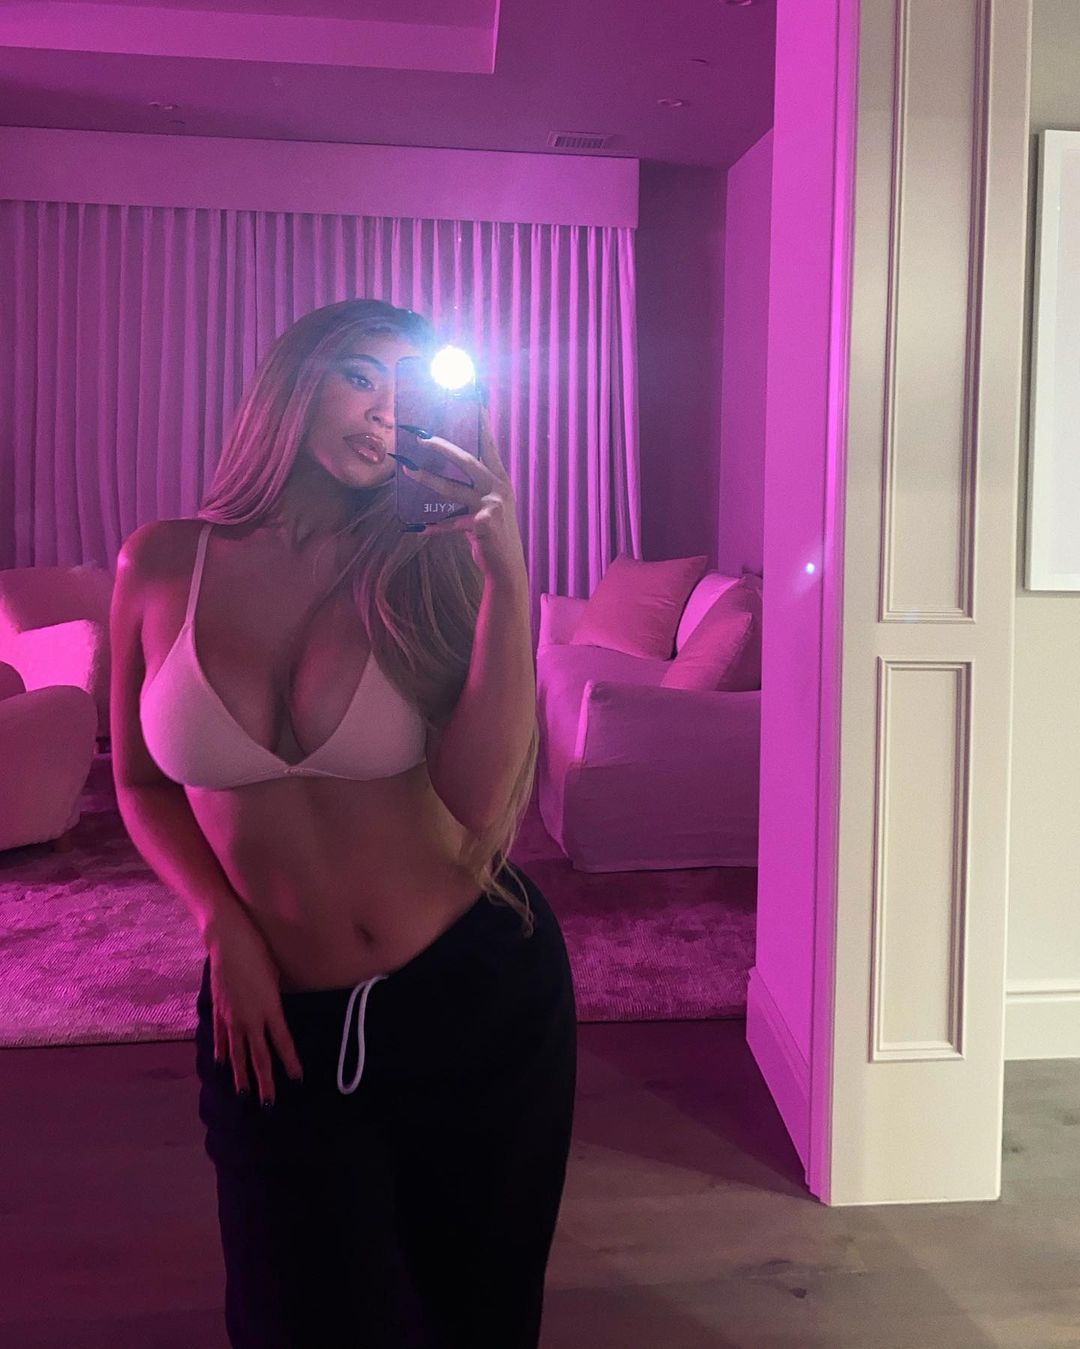 Only fans kylie jenner